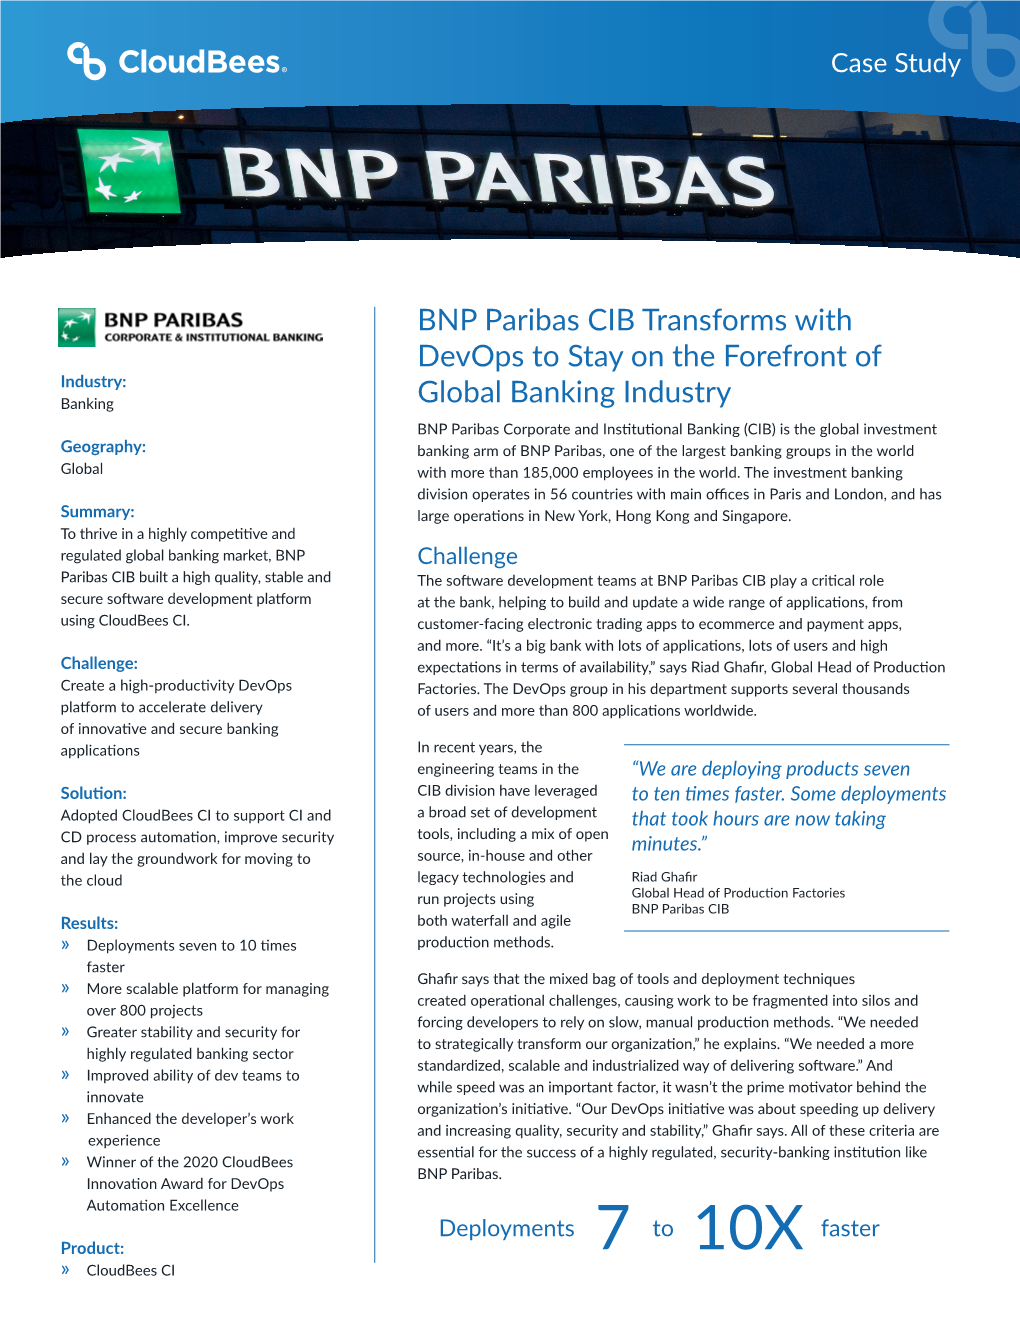 BNP Paribas CIB Transforms with Devops to Stay on the Forefront Of